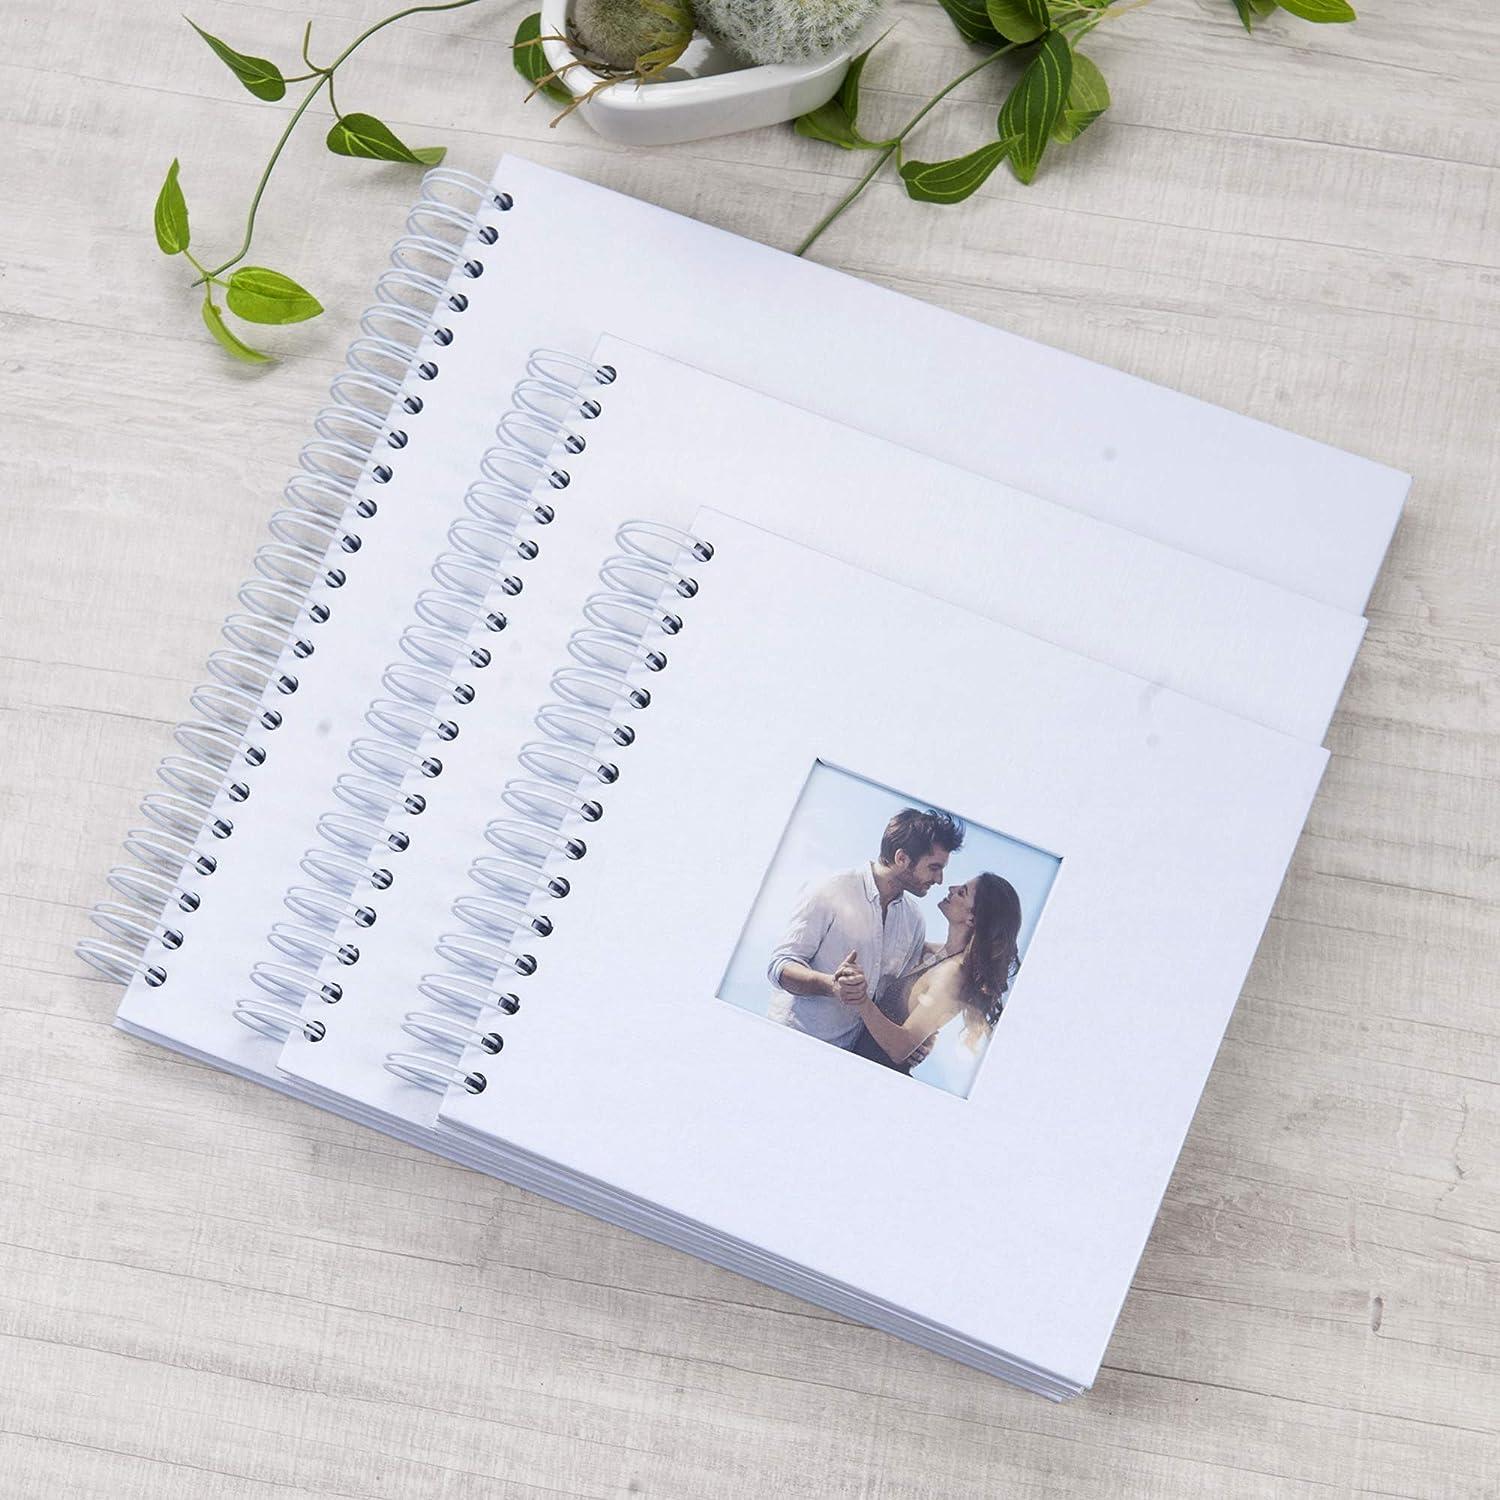 10 x 10 Inch DIY Scrapbook Photo Album with Cover Photo 80 Pages Hardcover  Craft Paper Photo Album for Guest Book, Anniversary, Valentines Day Gifts